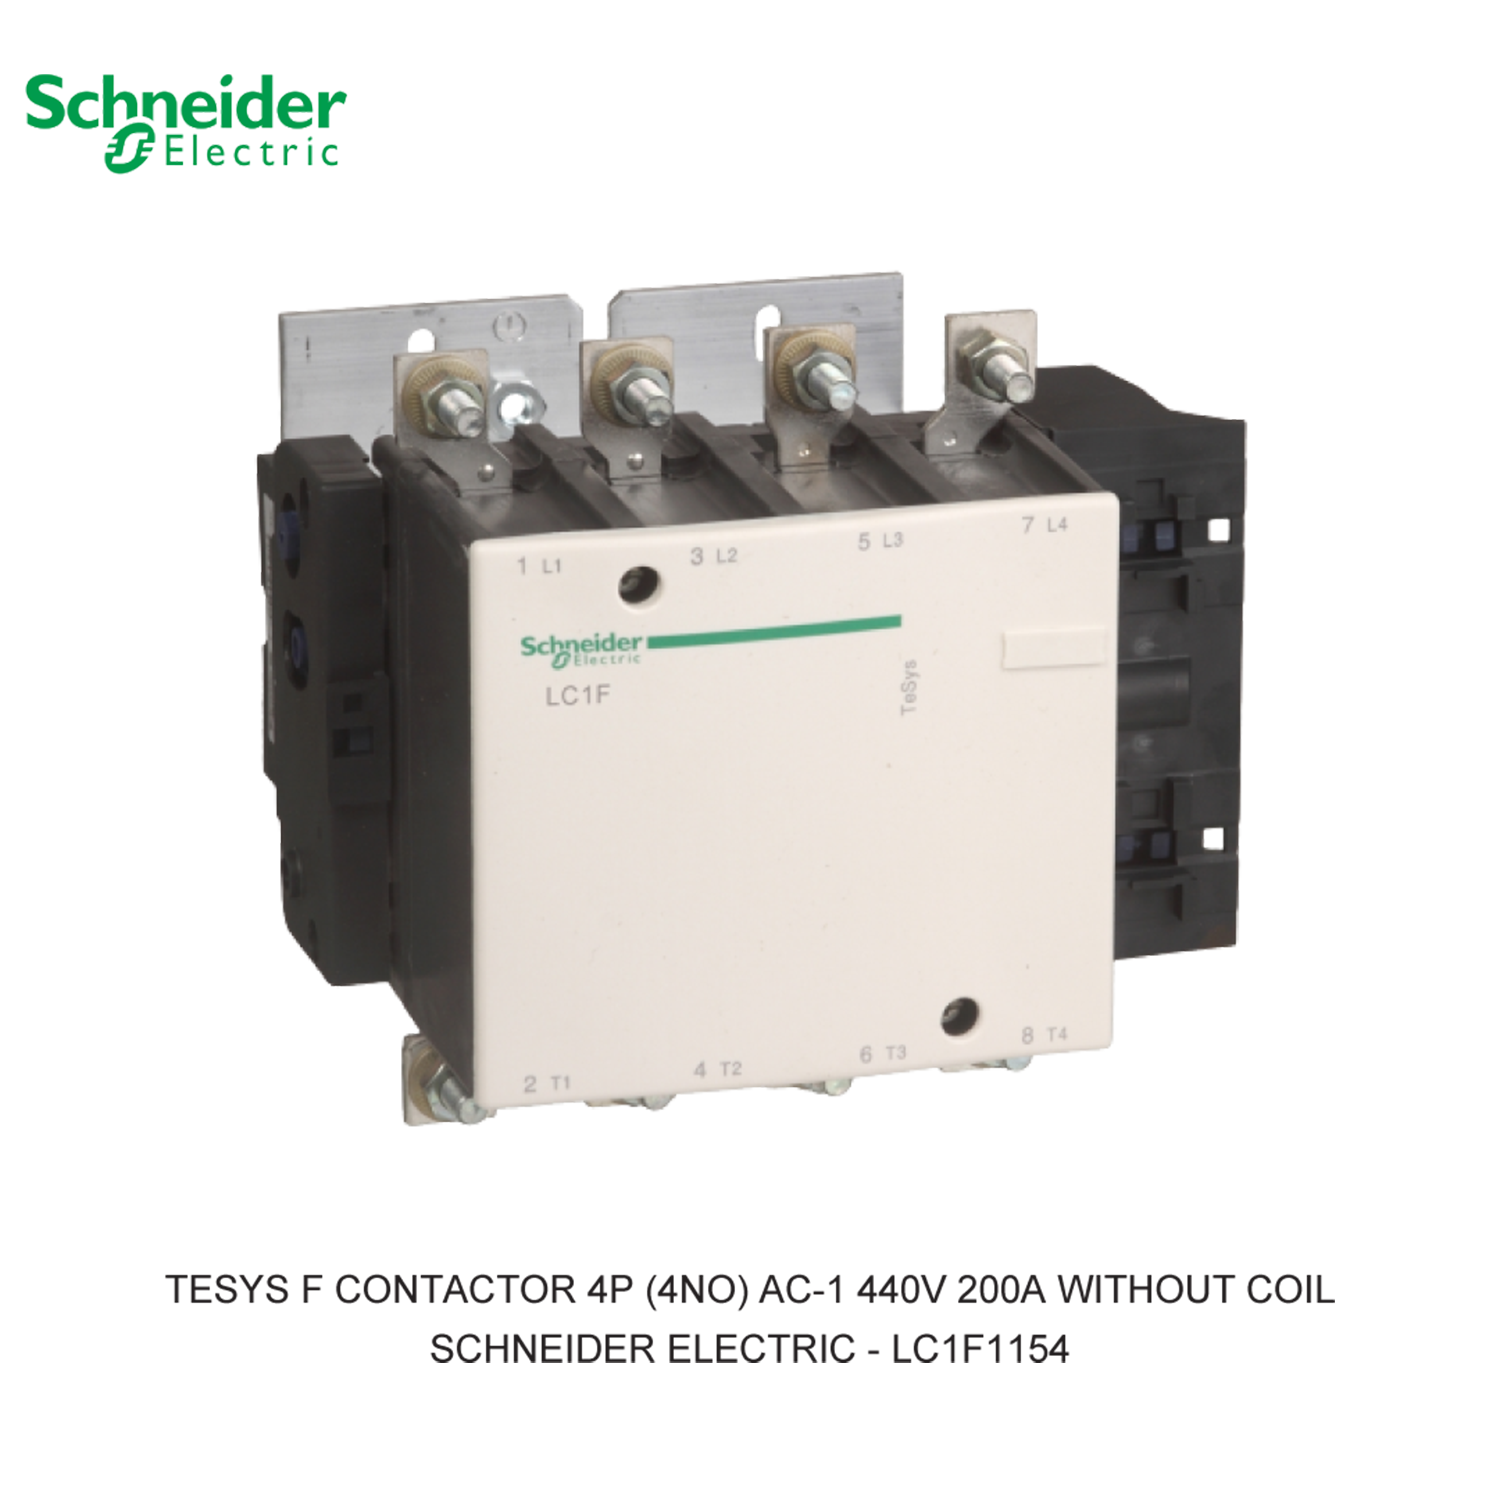 TESYS F CONTACTOR 4P (4NO) AC-1 440V 200A WITHOUT COIL